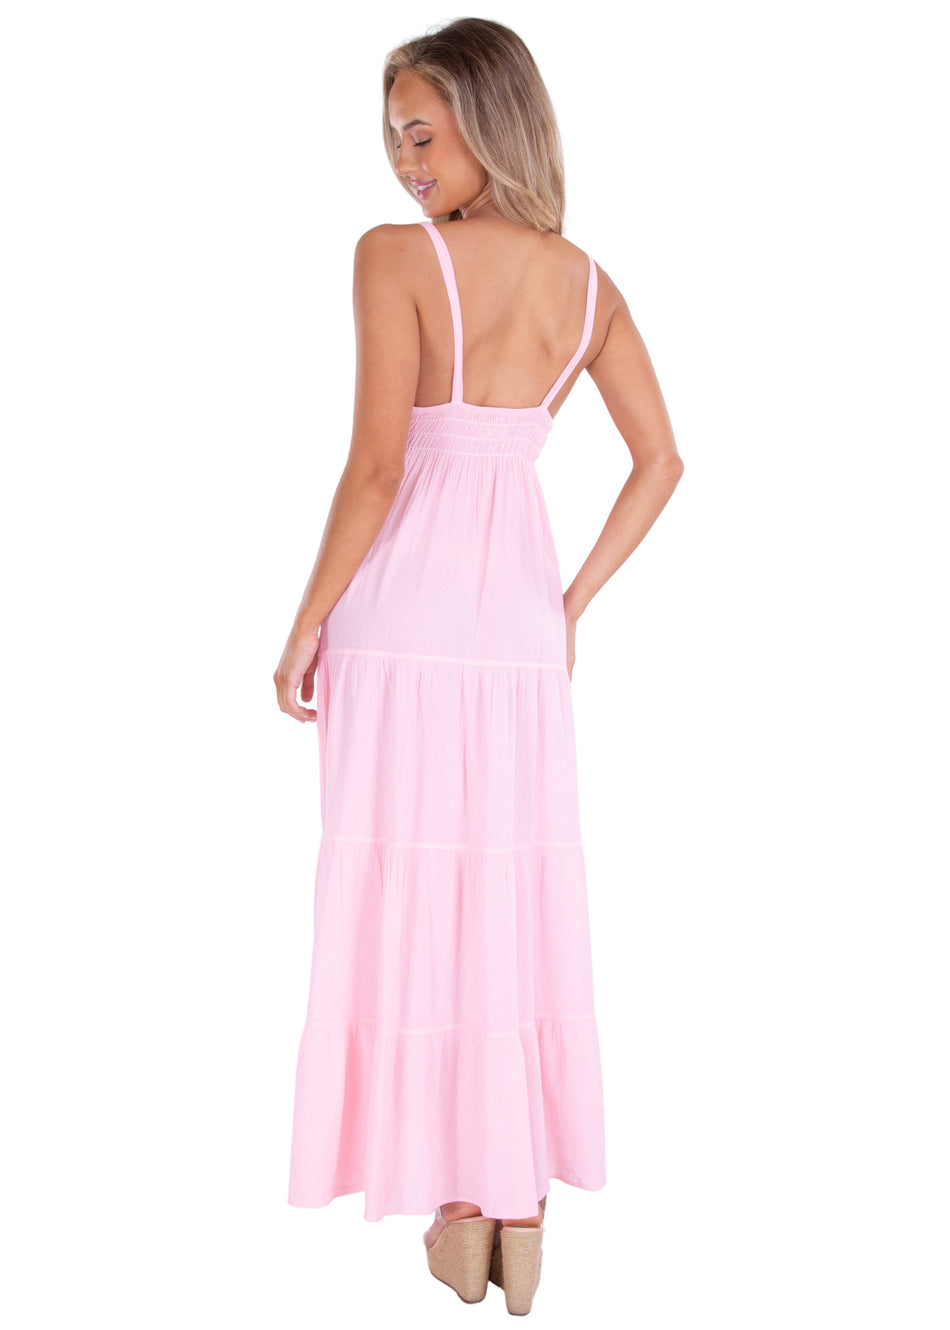 NW1430 - Baby Pink Cotton Dress